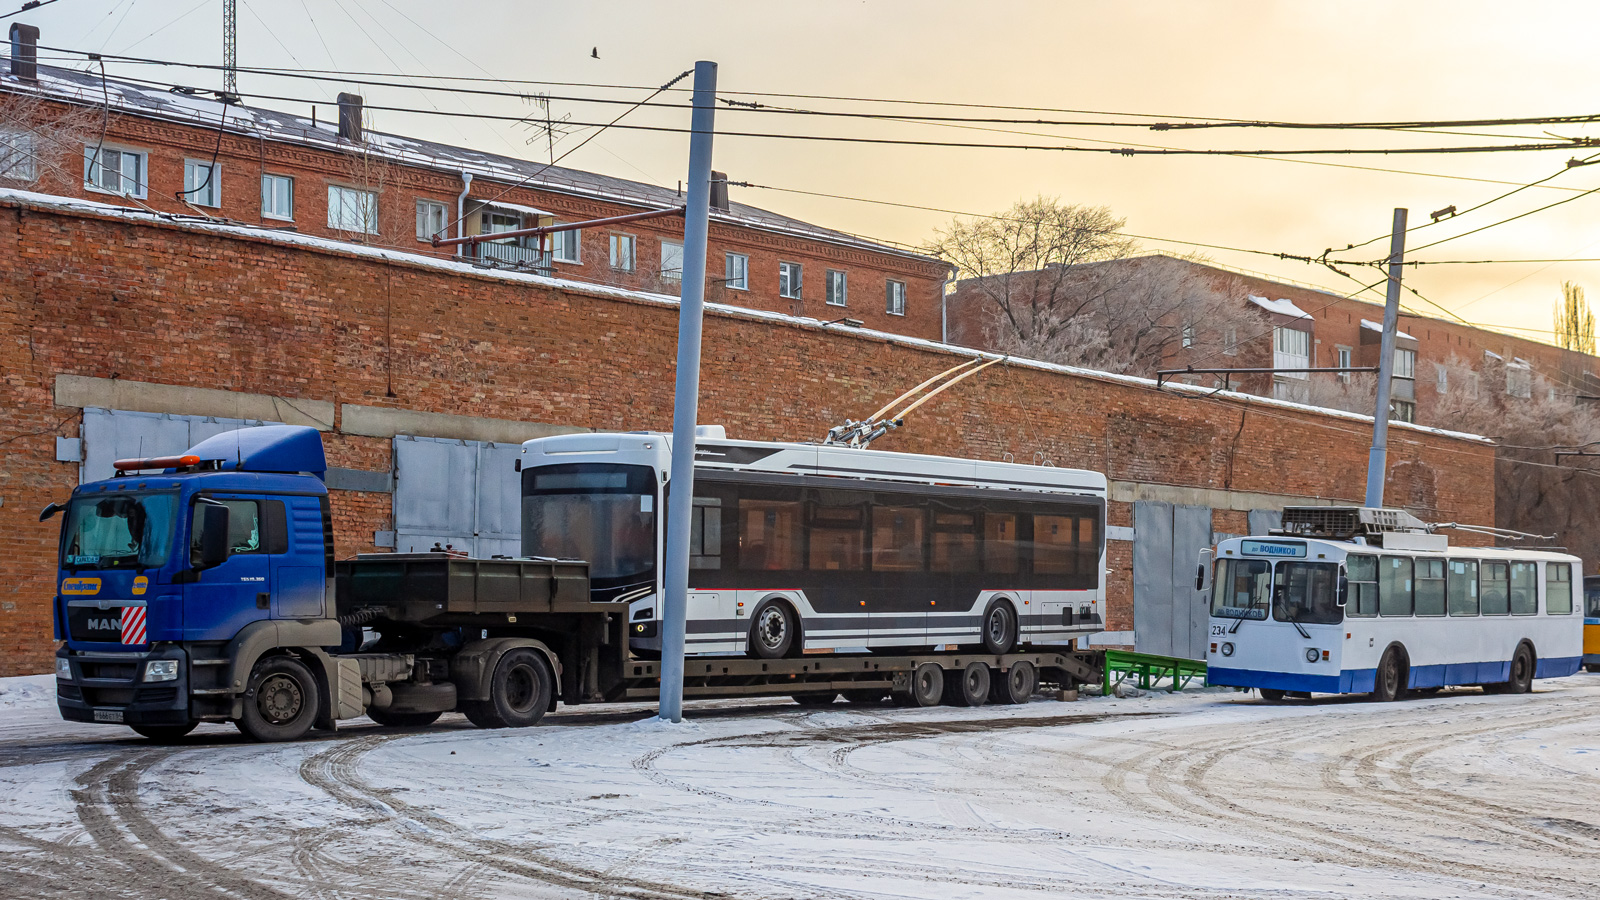 Omsk — Trolleybus depot 1 (May Day)